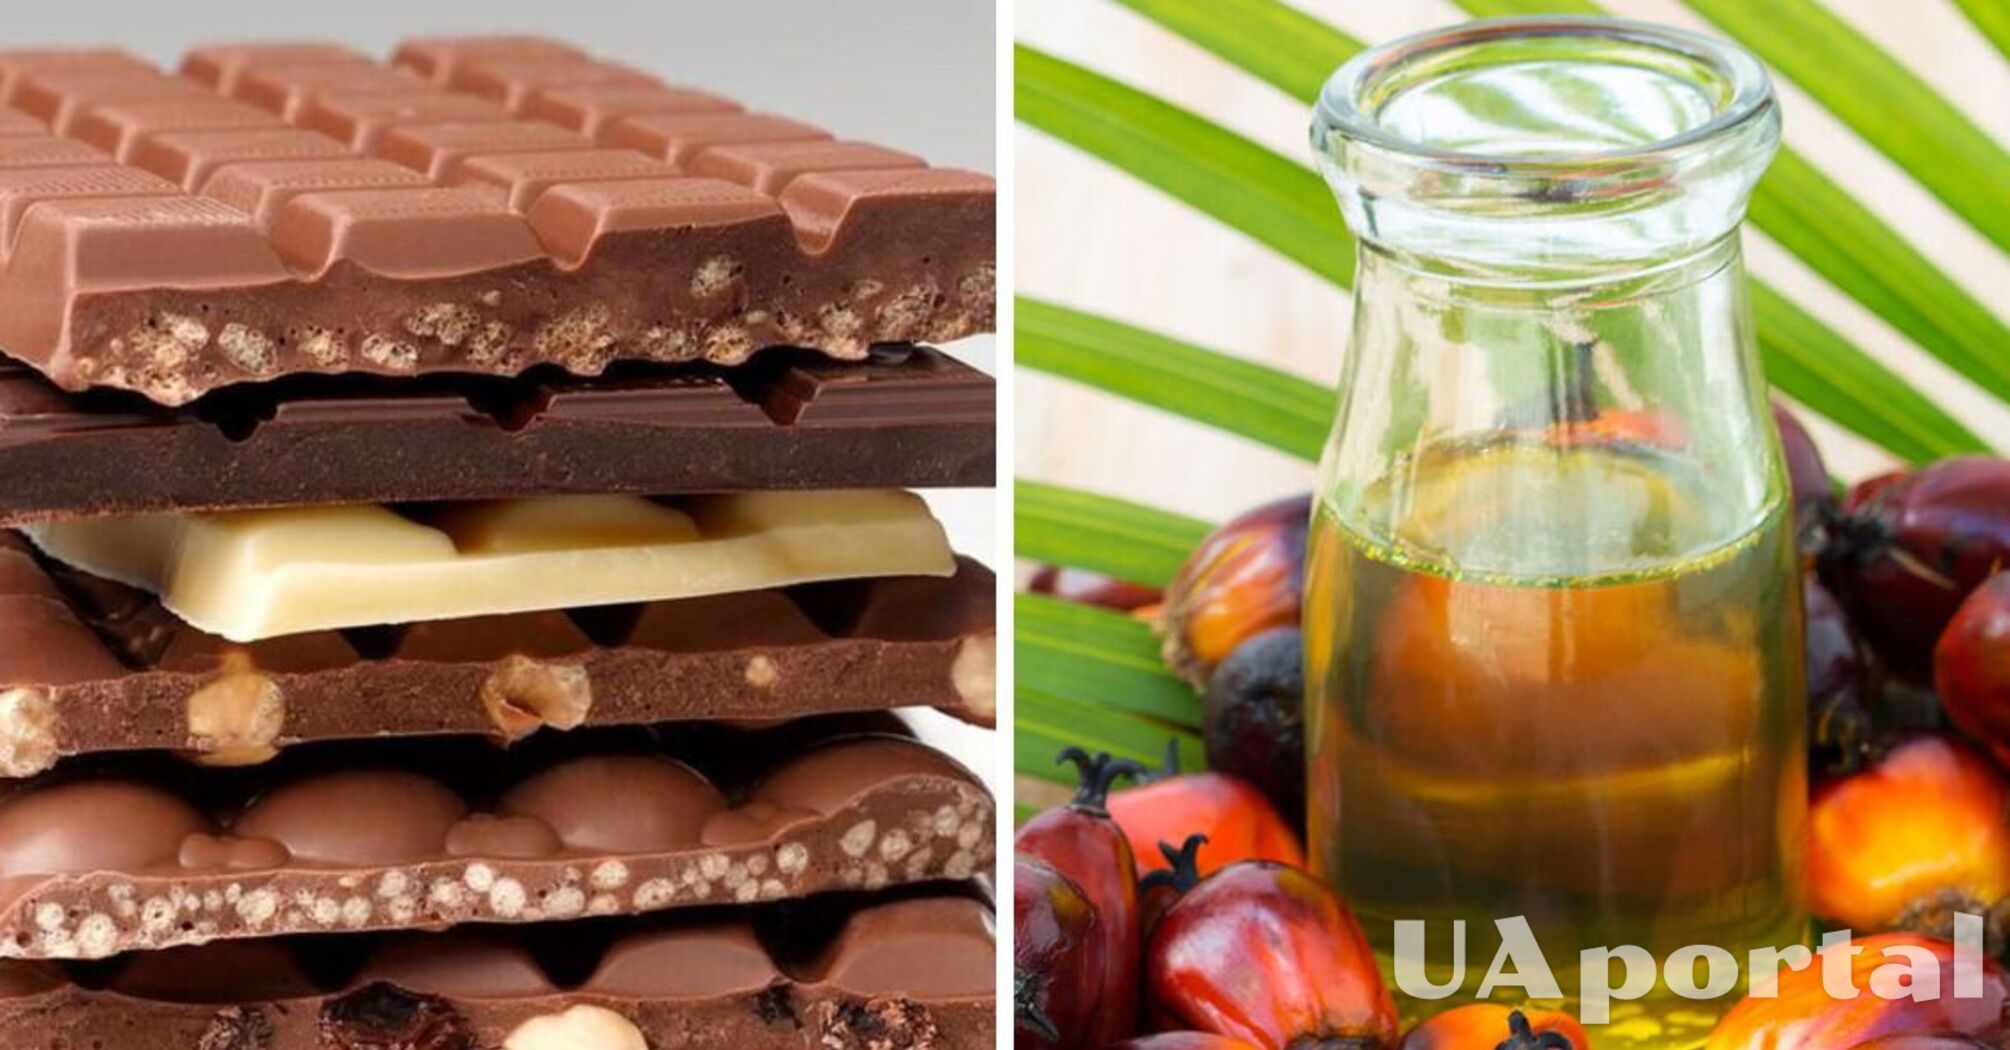 Scientists have answered which chocolate is healthy